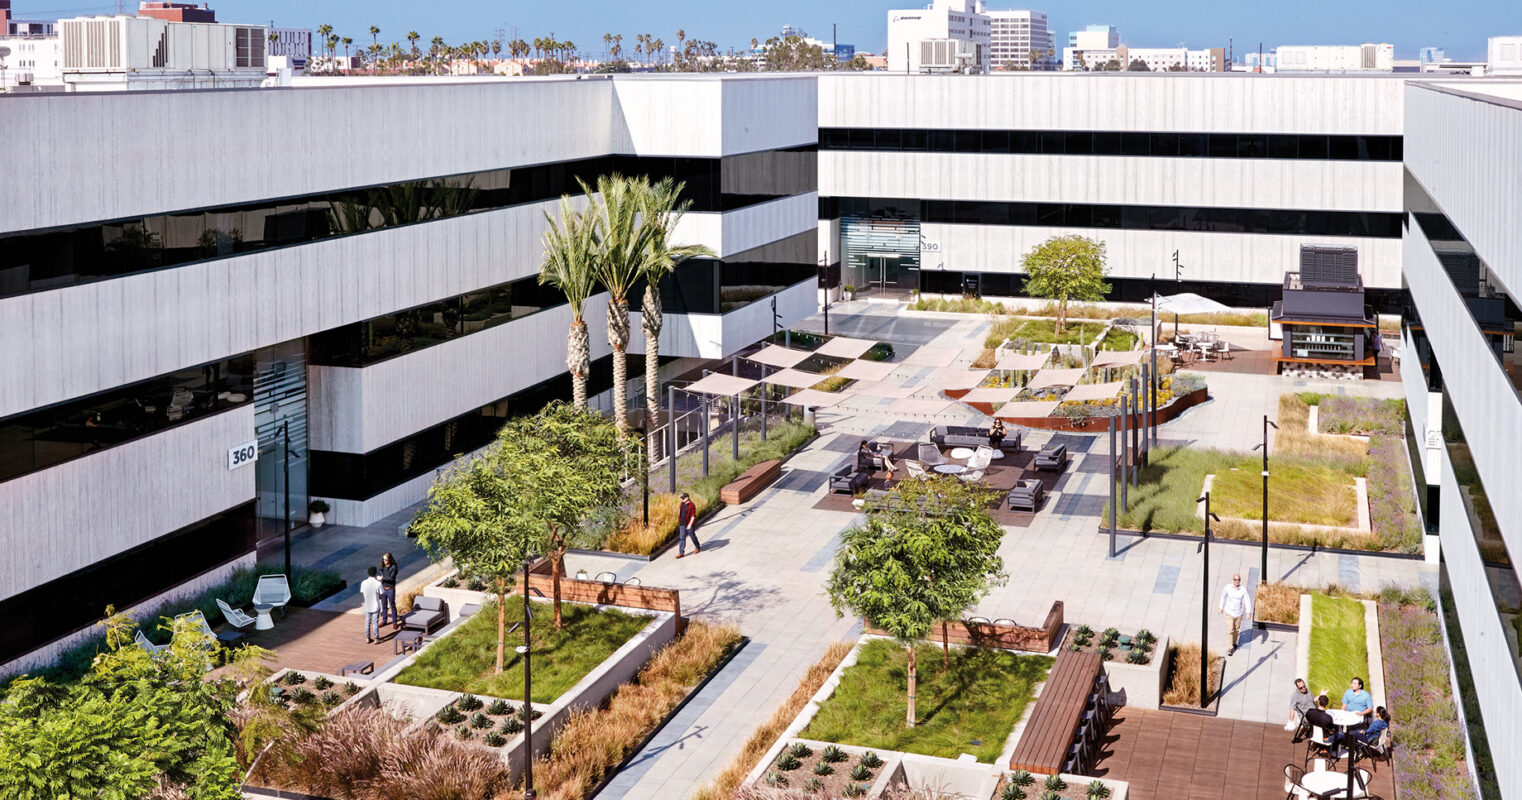 Modern office building with a landscaped outdoor courtyard featuring seating areas, palm trees, and a checkered walkway, encouraging a blend of work and relaxation in an urban setting.